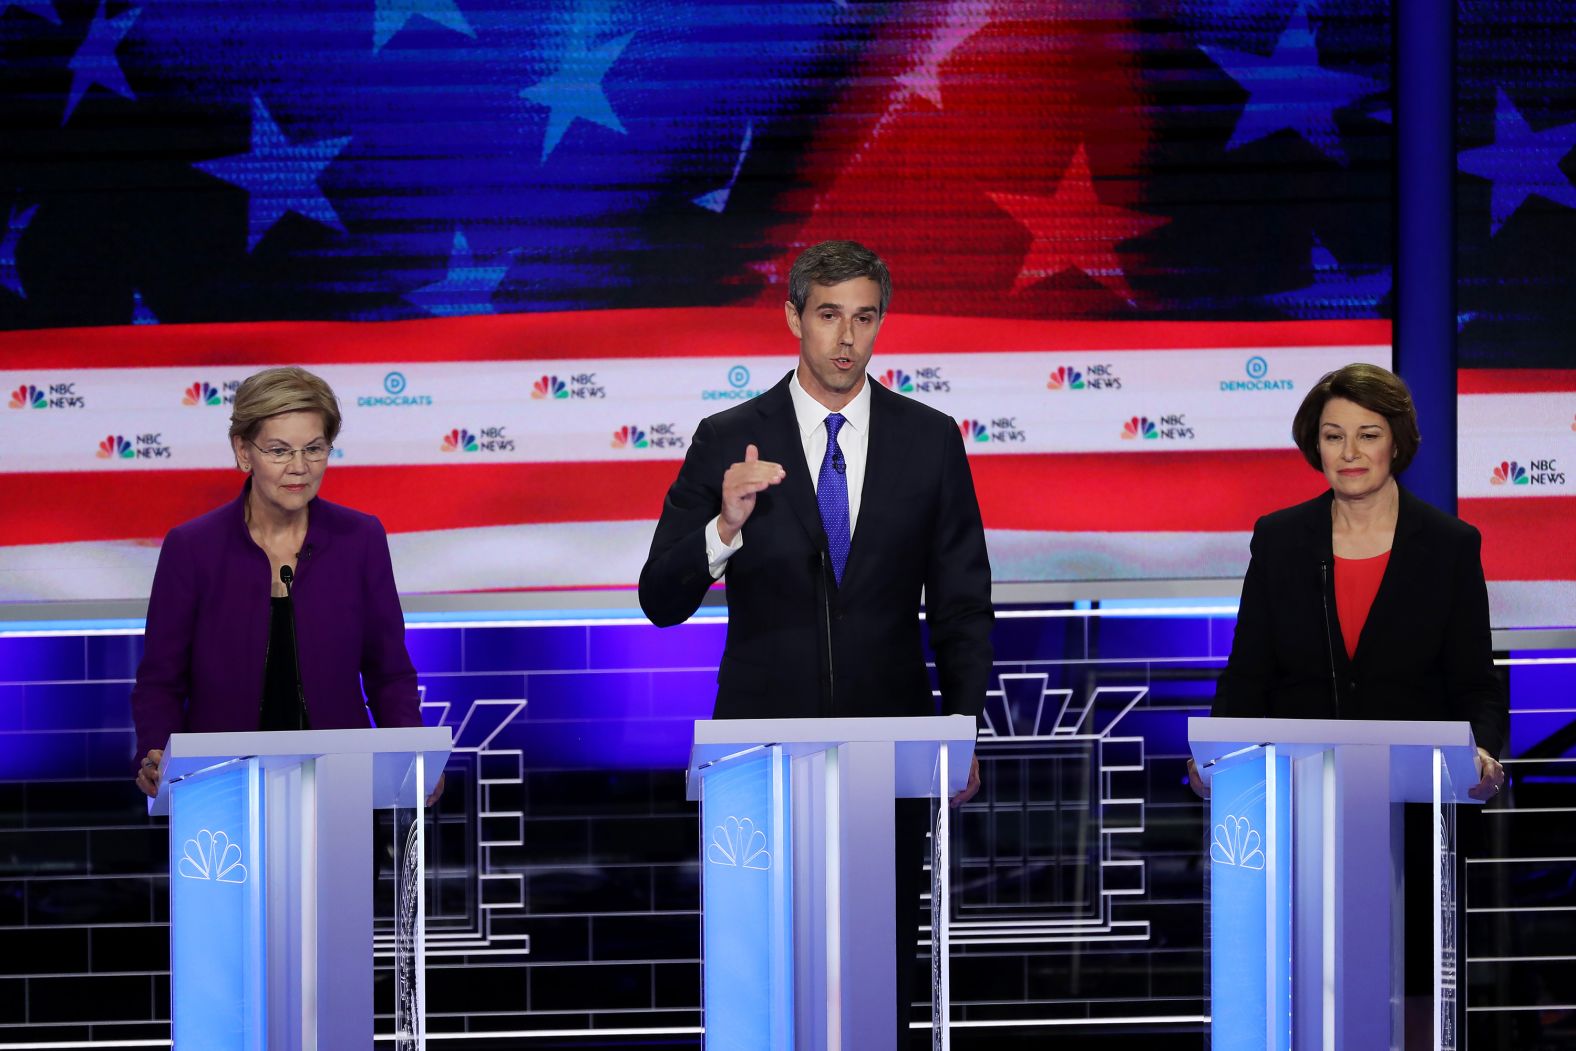 O'Rourke answers an early question during Wednesday's debate. During his first answer, he <a href="index.php?page=&url=https%3A%2F%2Fwww.cnn.com%2Fpolitics%2Flive-news%2Fdemocratic-debate-june-26-2019%2Fh_2806cb75711ee4cce8322dafa7049161" target="_blank">switched over to Spanish</a> for a bit. Booker and Castro also spoke some Spanish during the debate.